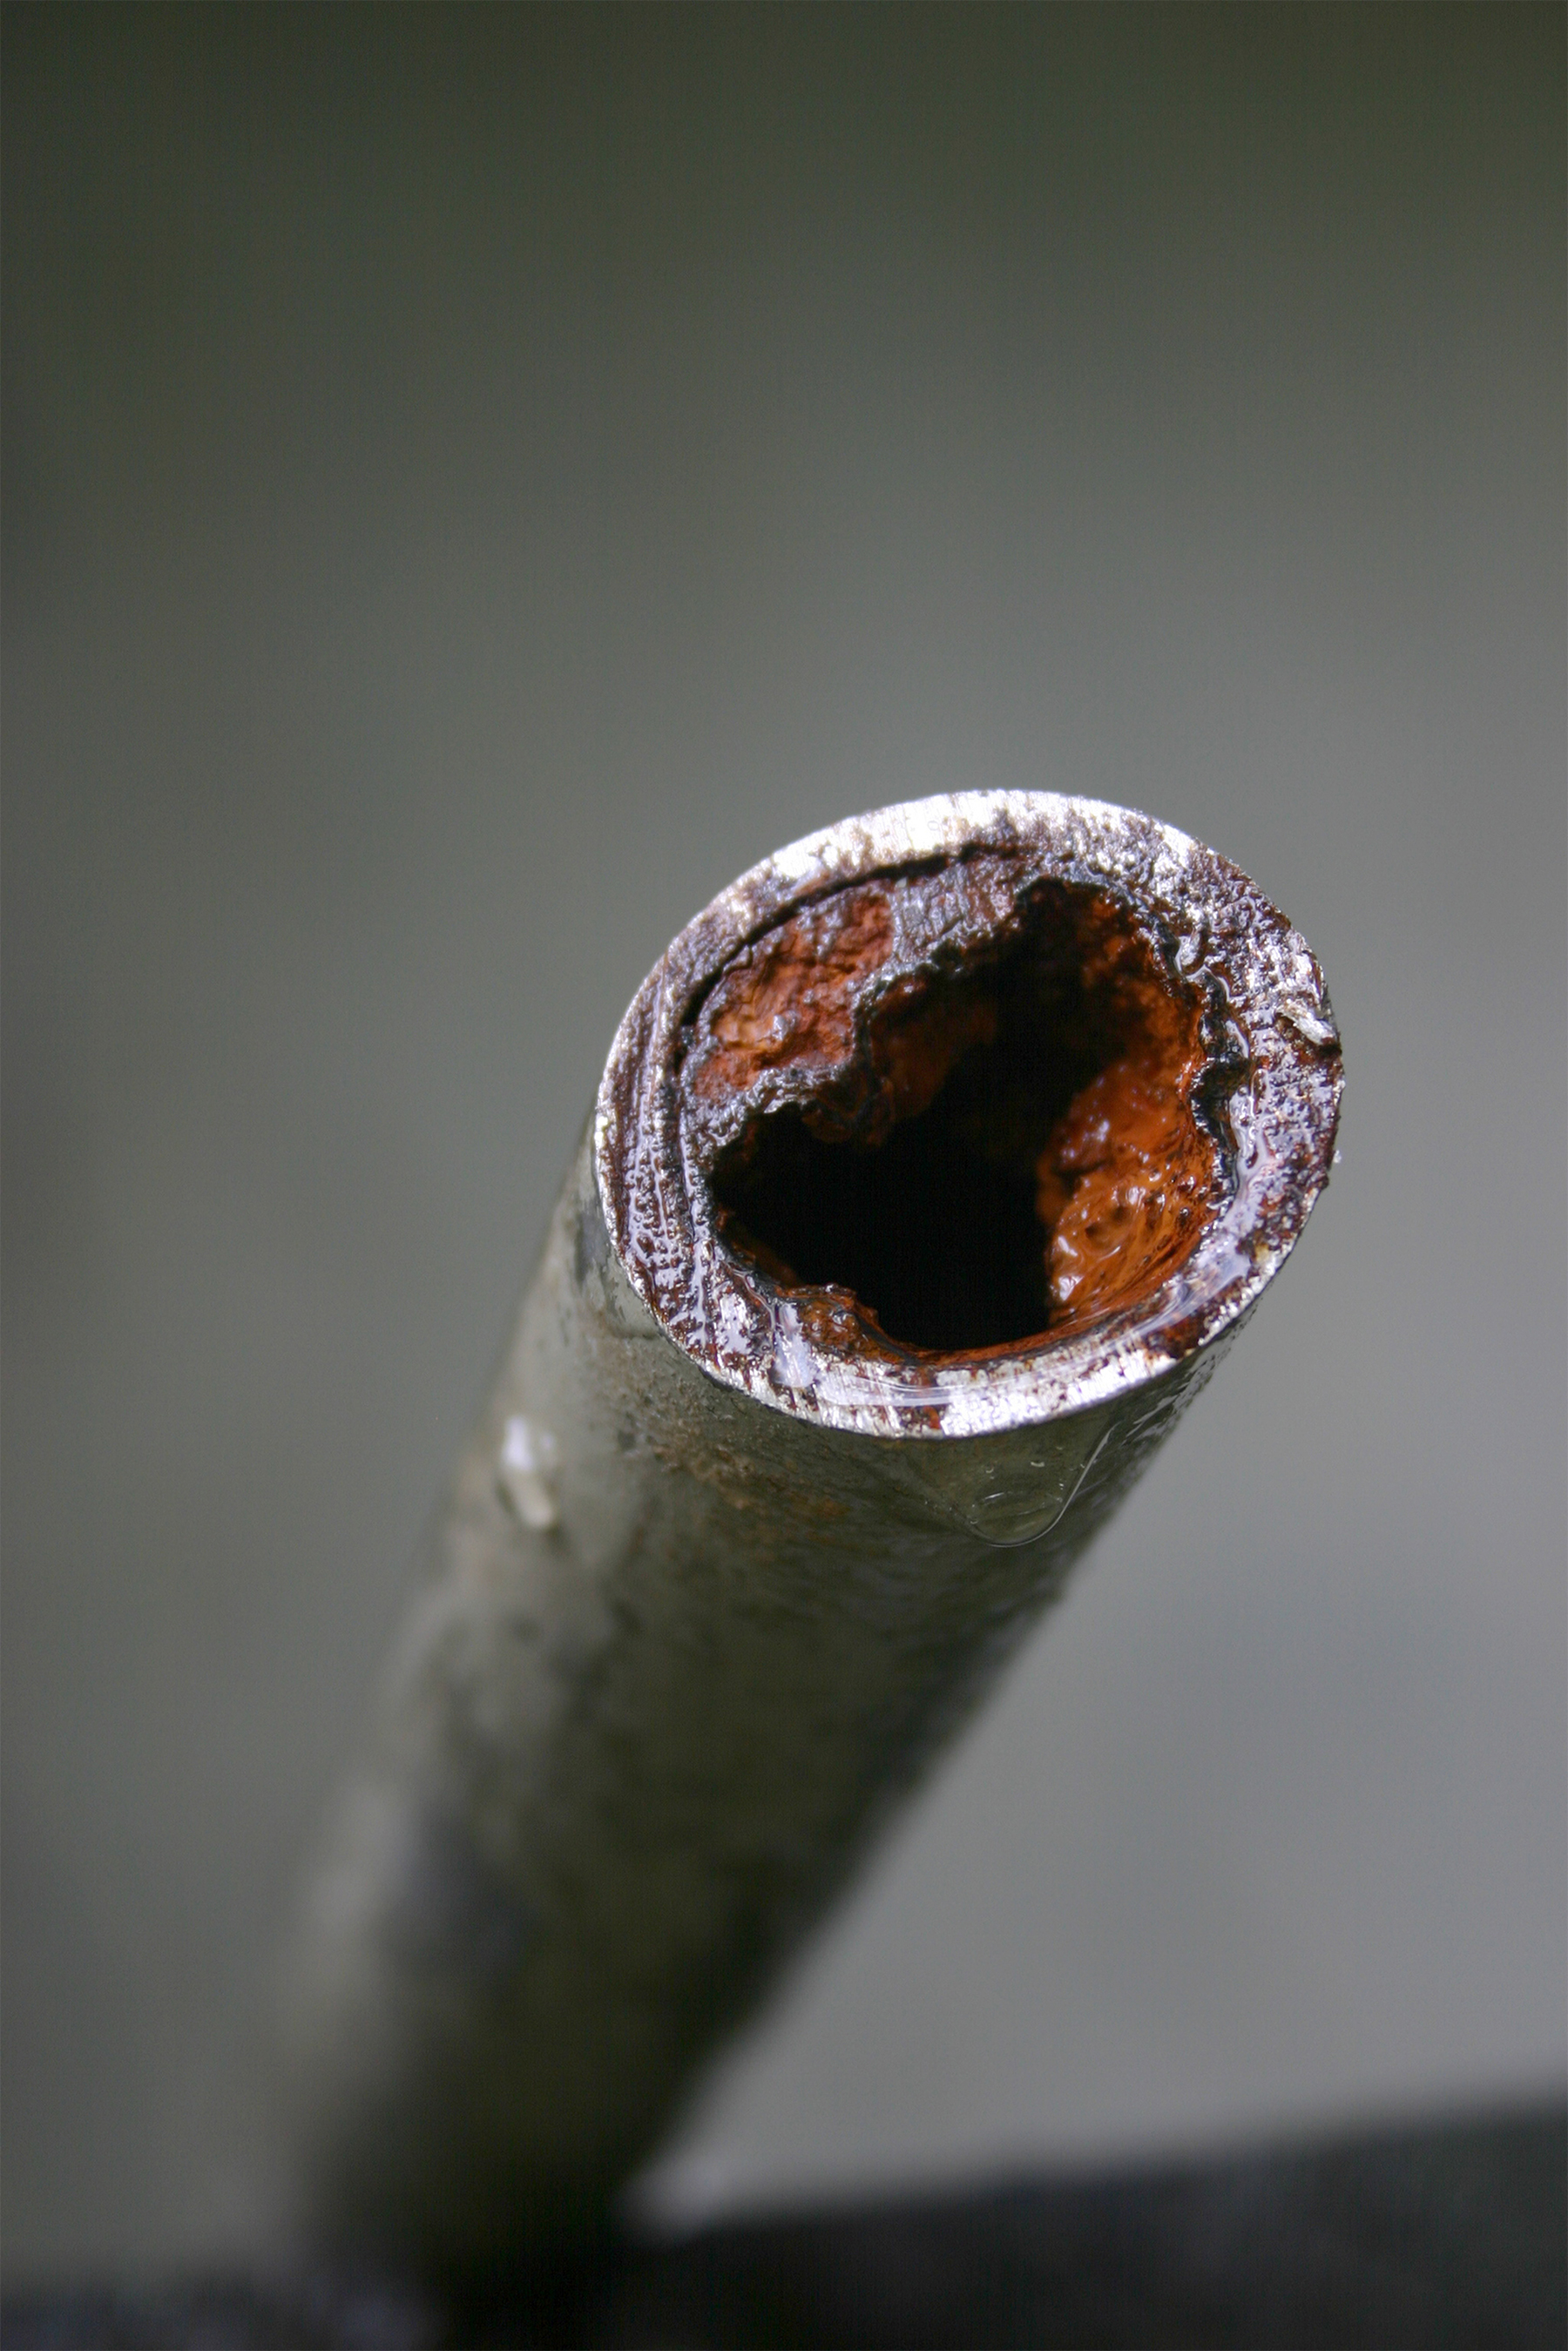 A household water pipe that has experienced hard water corrosion